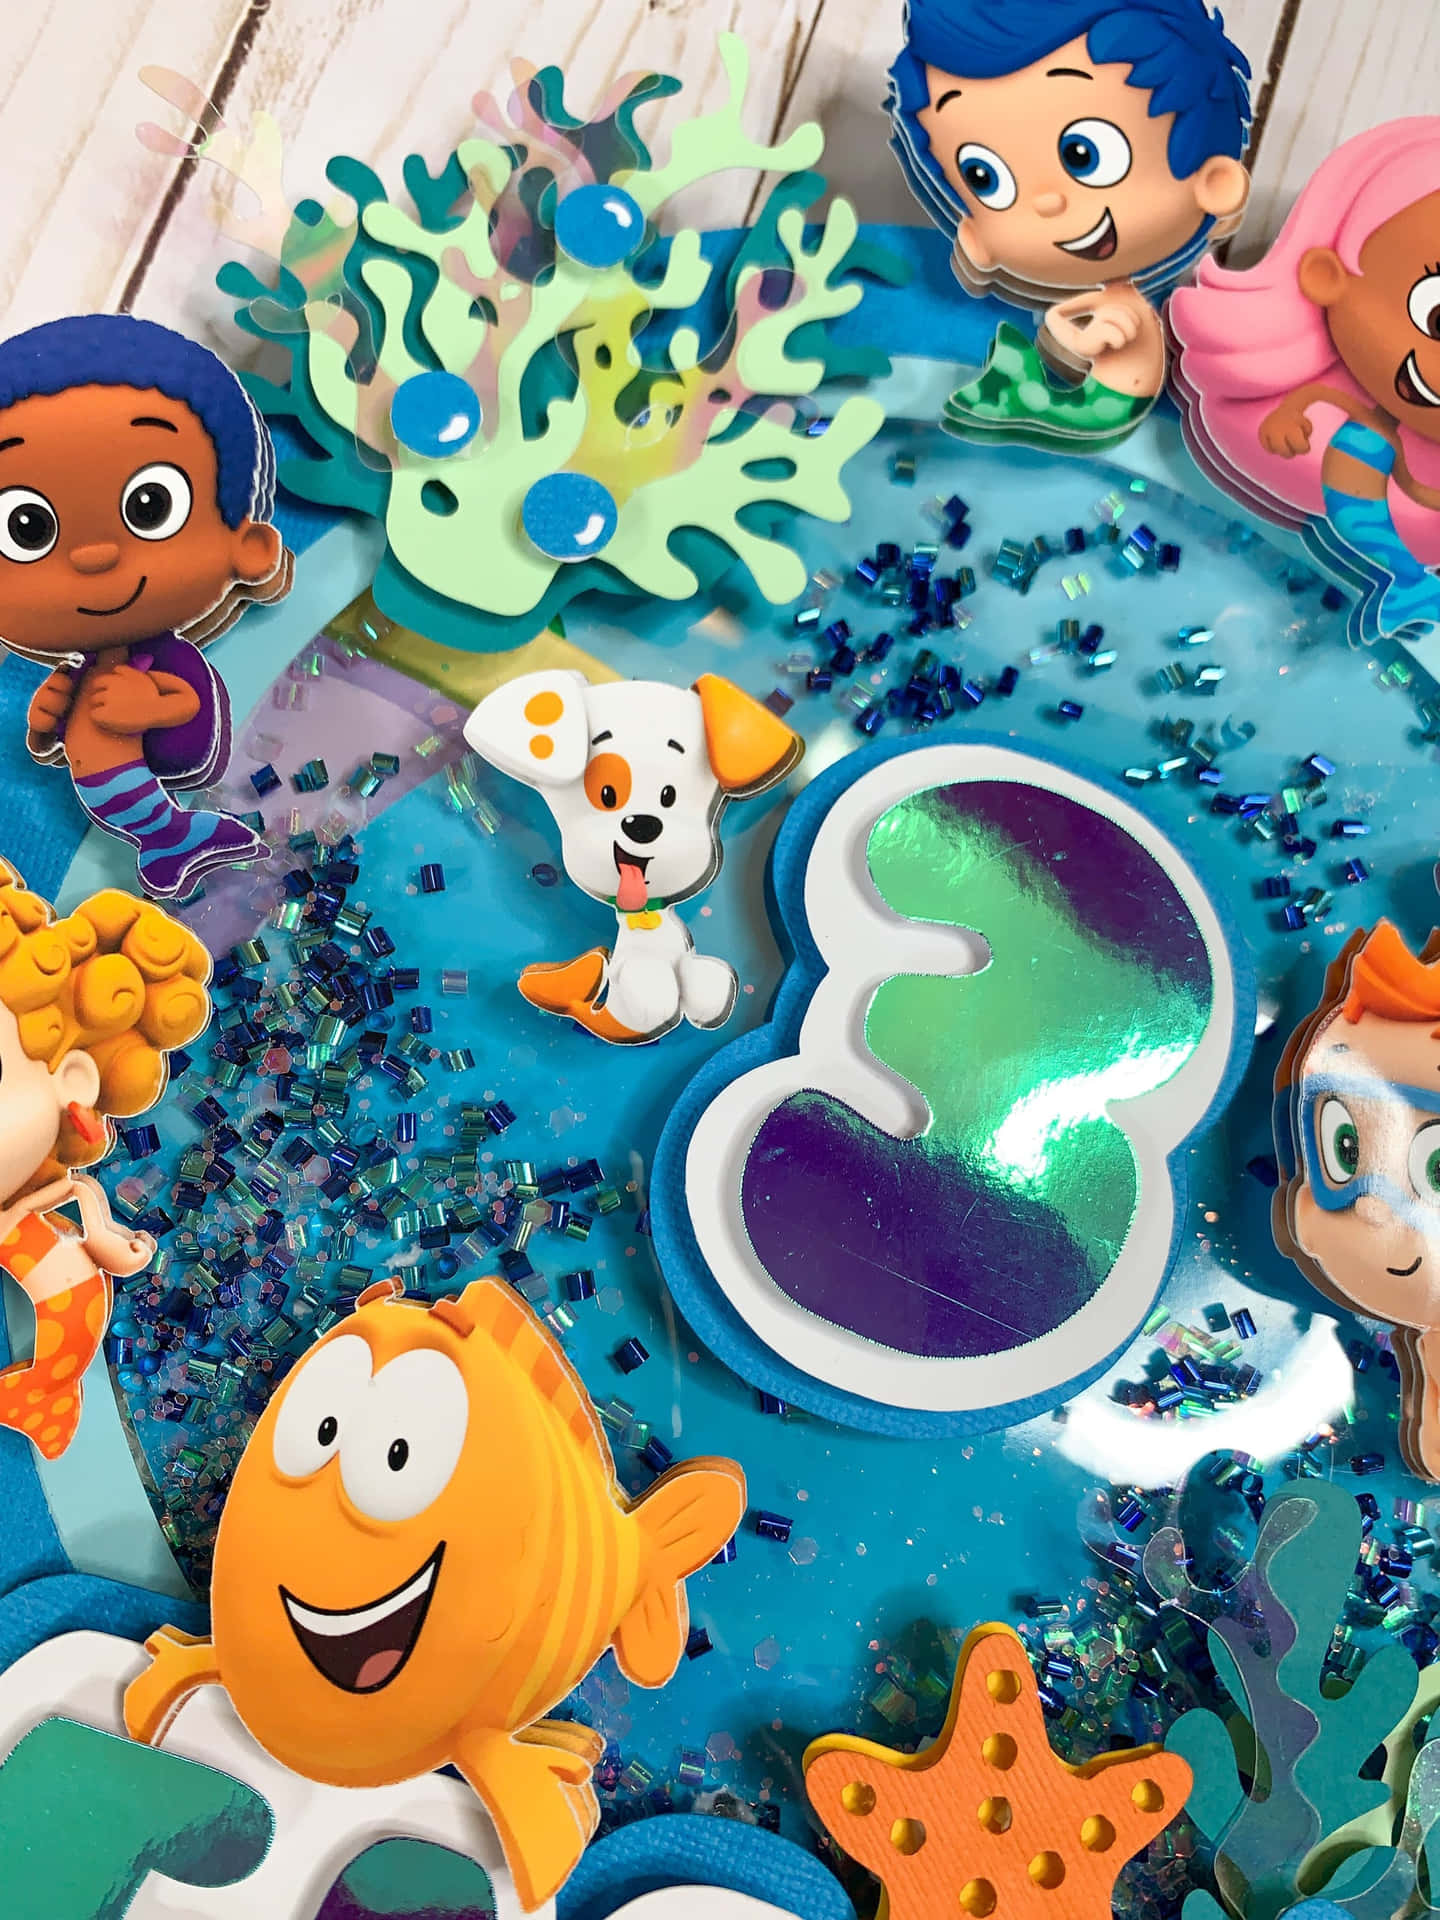 "Discover and Explore with Bubble Guppies!"